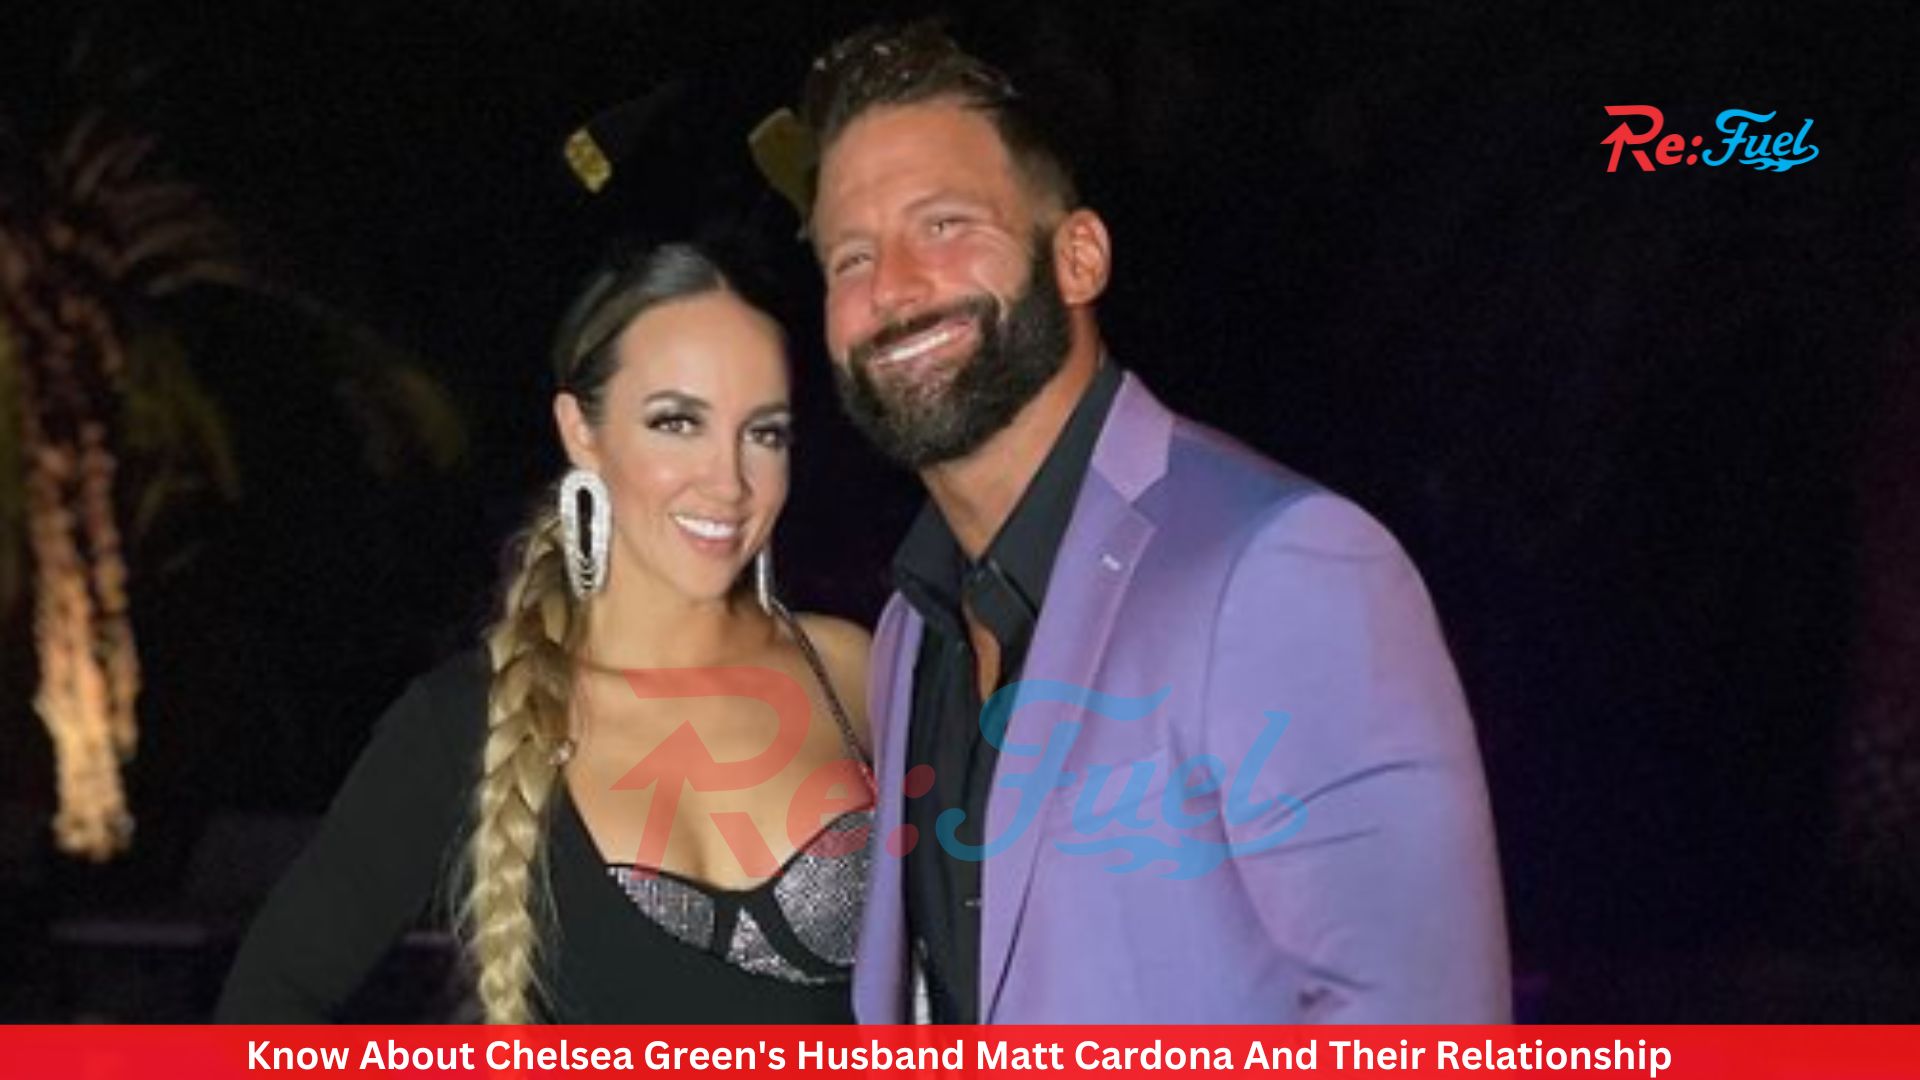 Know About Chelsea Green's Husband Matt Cardona And Their Relationship